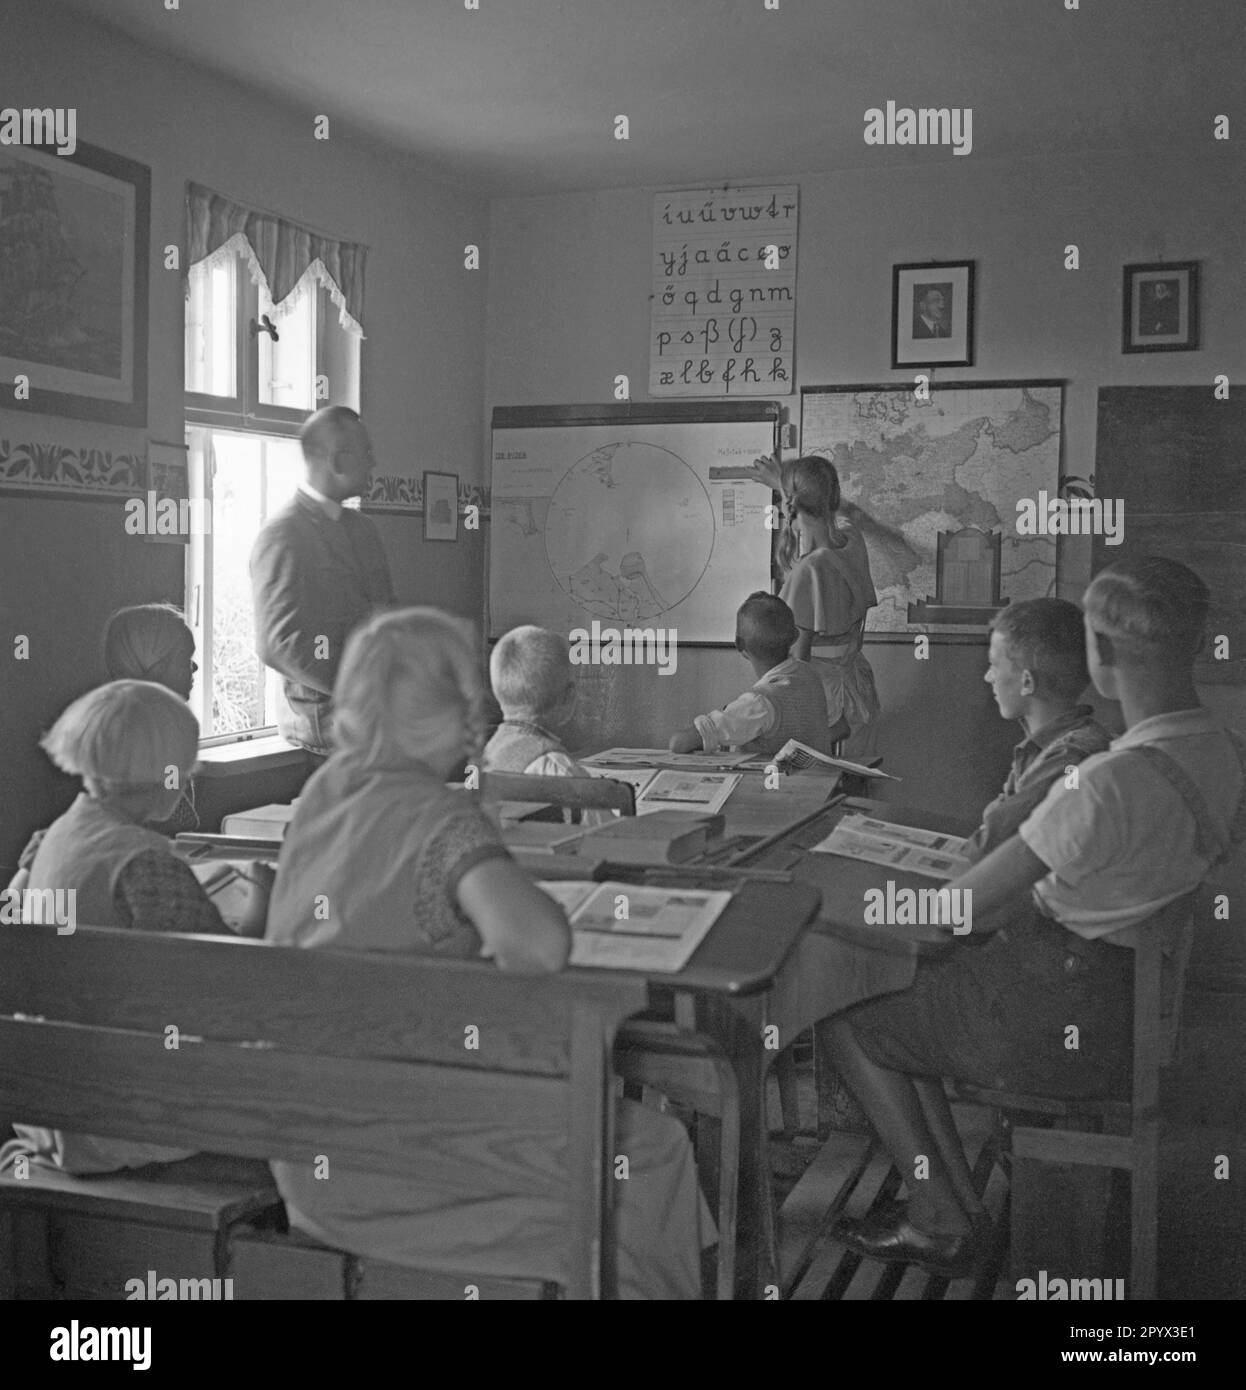 In a school on the Baltic Sea island of Ruden a teacher teaches students geography and local history. A student measures the scale with a ruler on a map showing the Baltic Sea coast and the island of Ruden and Usedom. Above a map of Germany hangs a portrait of Adolf Hitler. Stock Photo